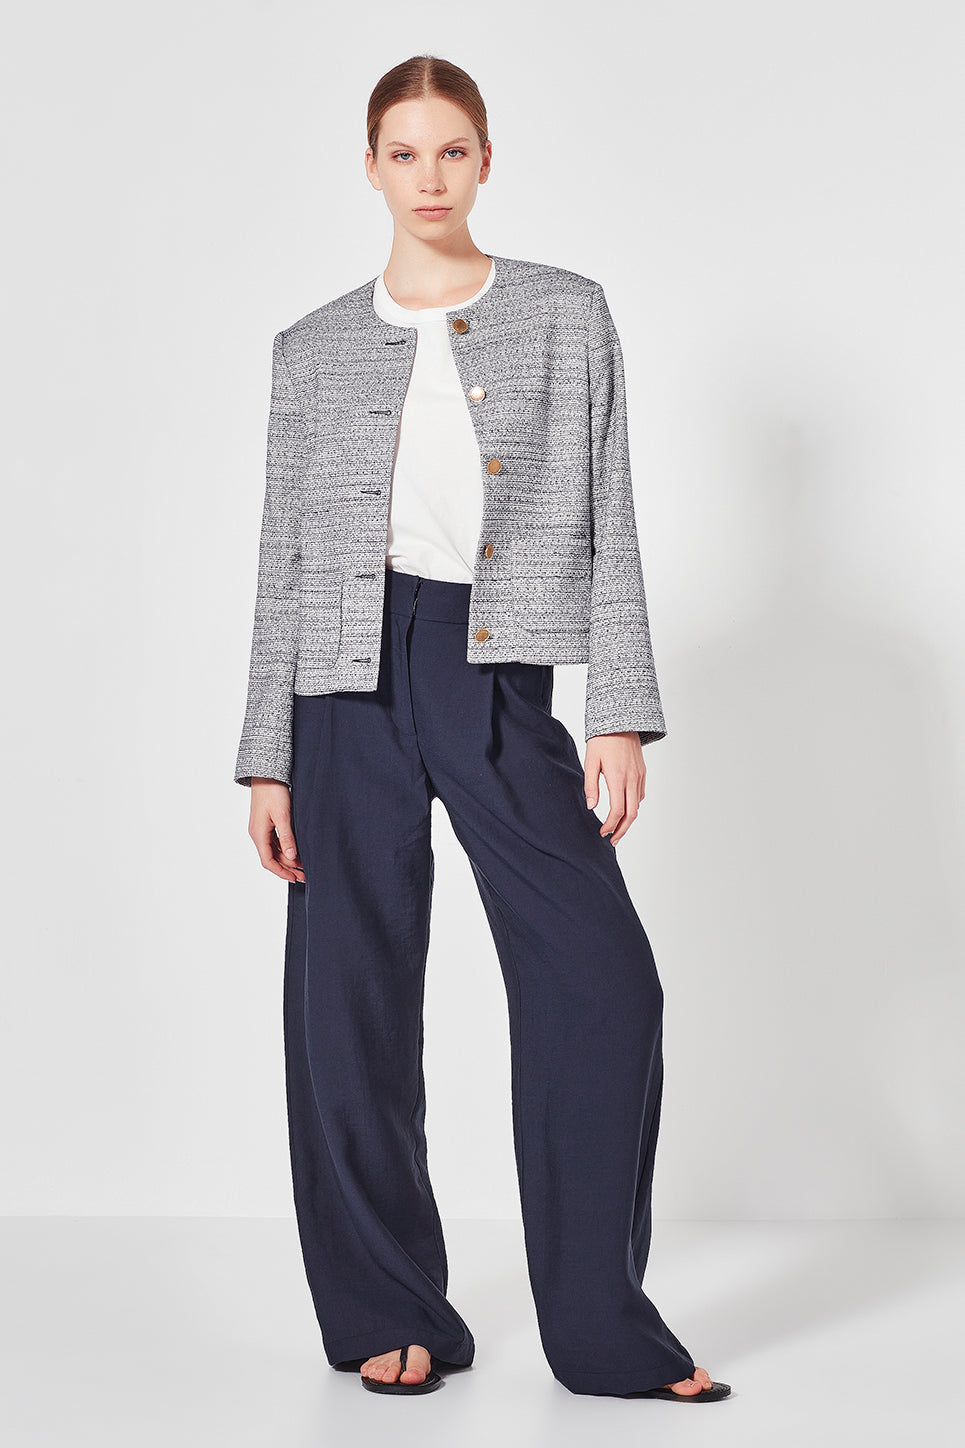 The Gabrielle Jacket in Navy Boucle